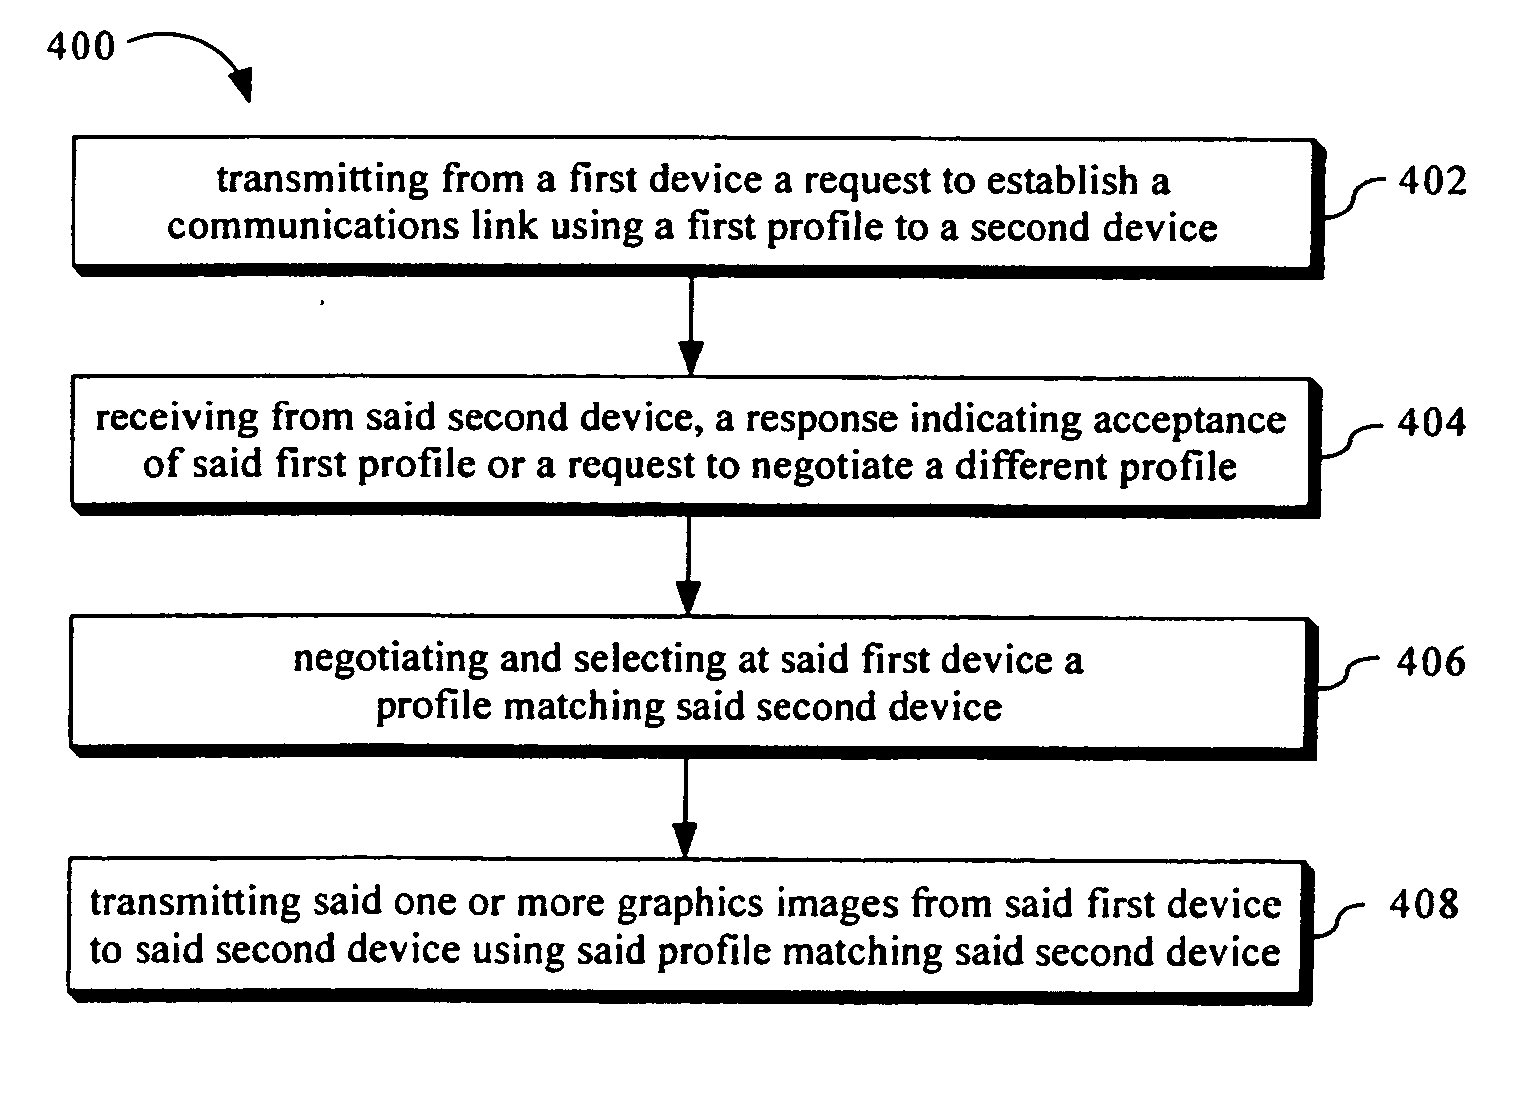 Method and system for sharing one or more graphics images between devices using profiles